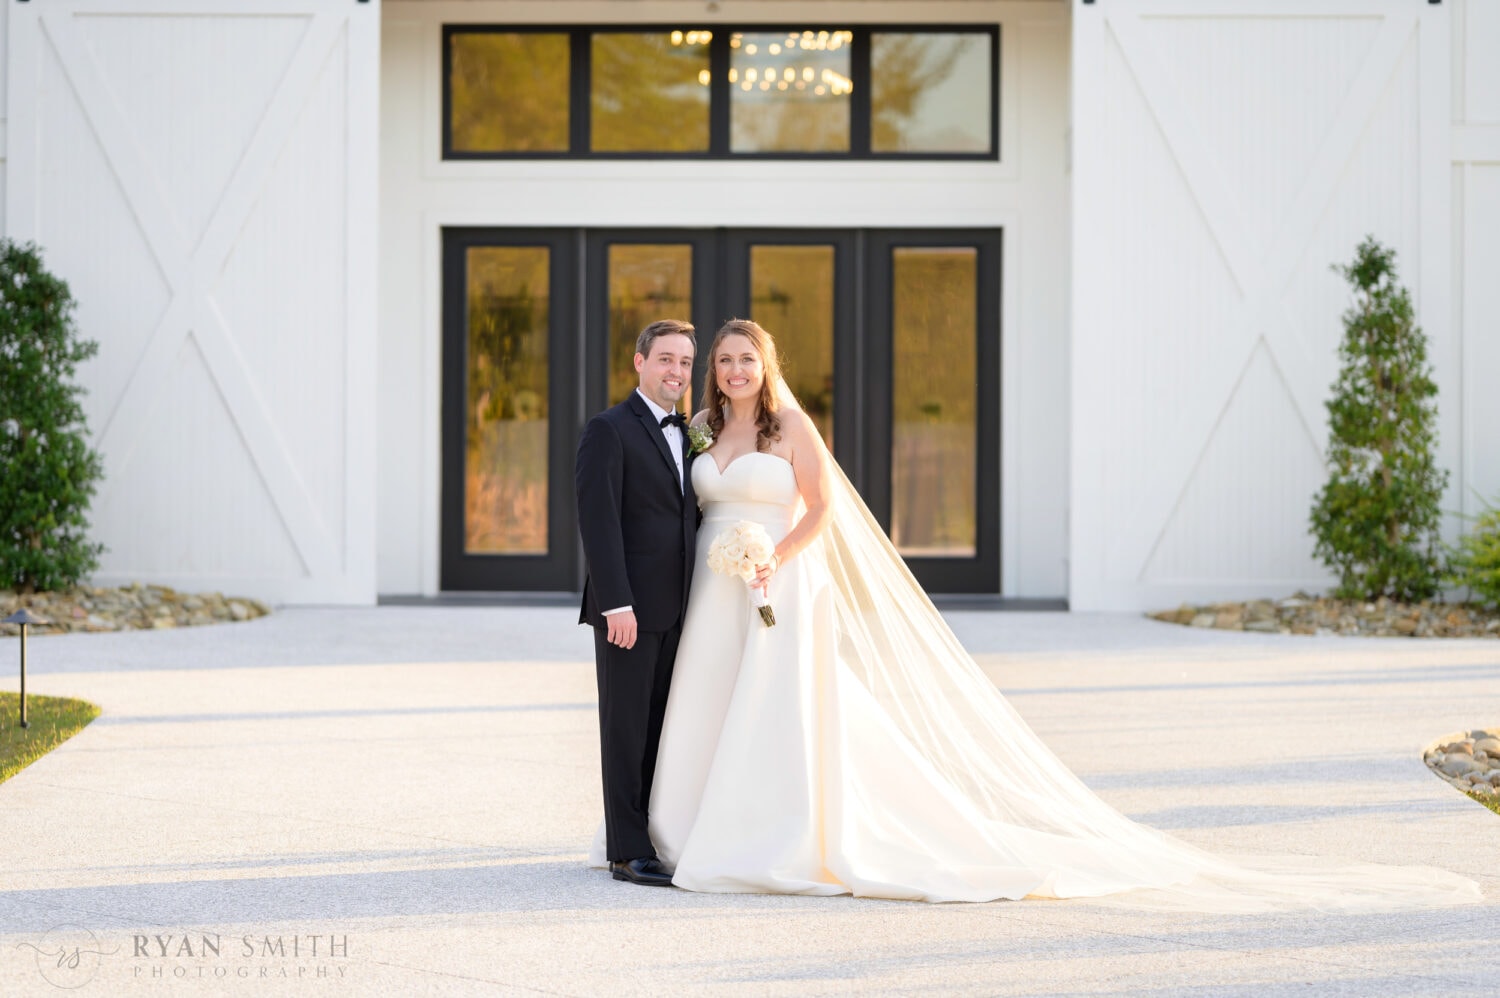 Portraits of bride and groom in front of the black doors - The Venue at White Oaks Farm